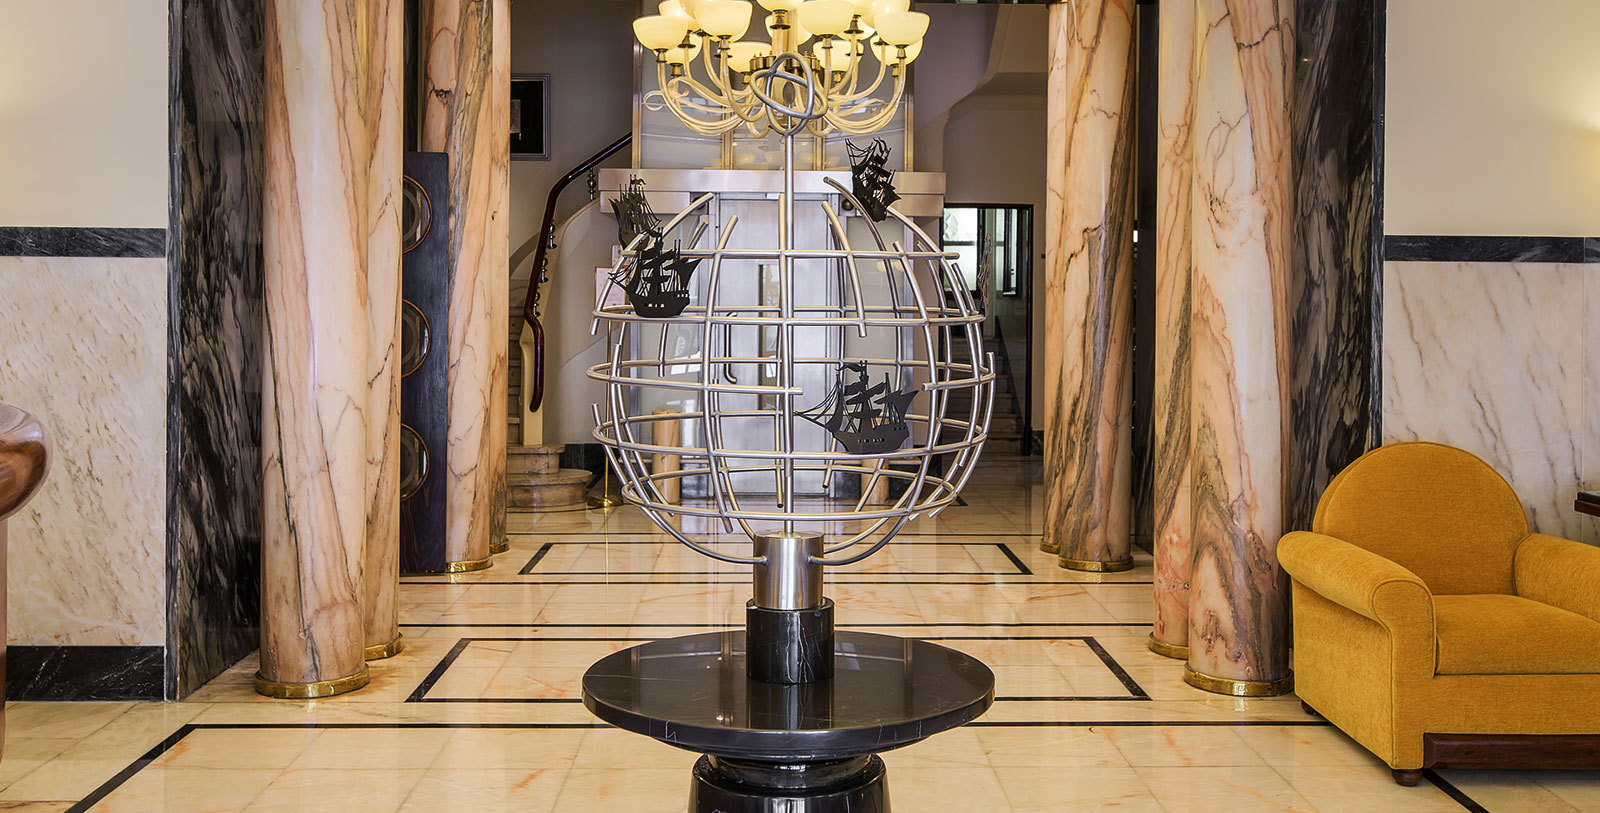 Image of armillary sphere in the lobby of Hotel Britania Art Deco, 1944, a member of Historic Hotels Worldwide in Lisbon, Portugal, Special Offers, Discounted Rates, Families, Romantic Escape, Honeymoons, Anniversaries, Reunions